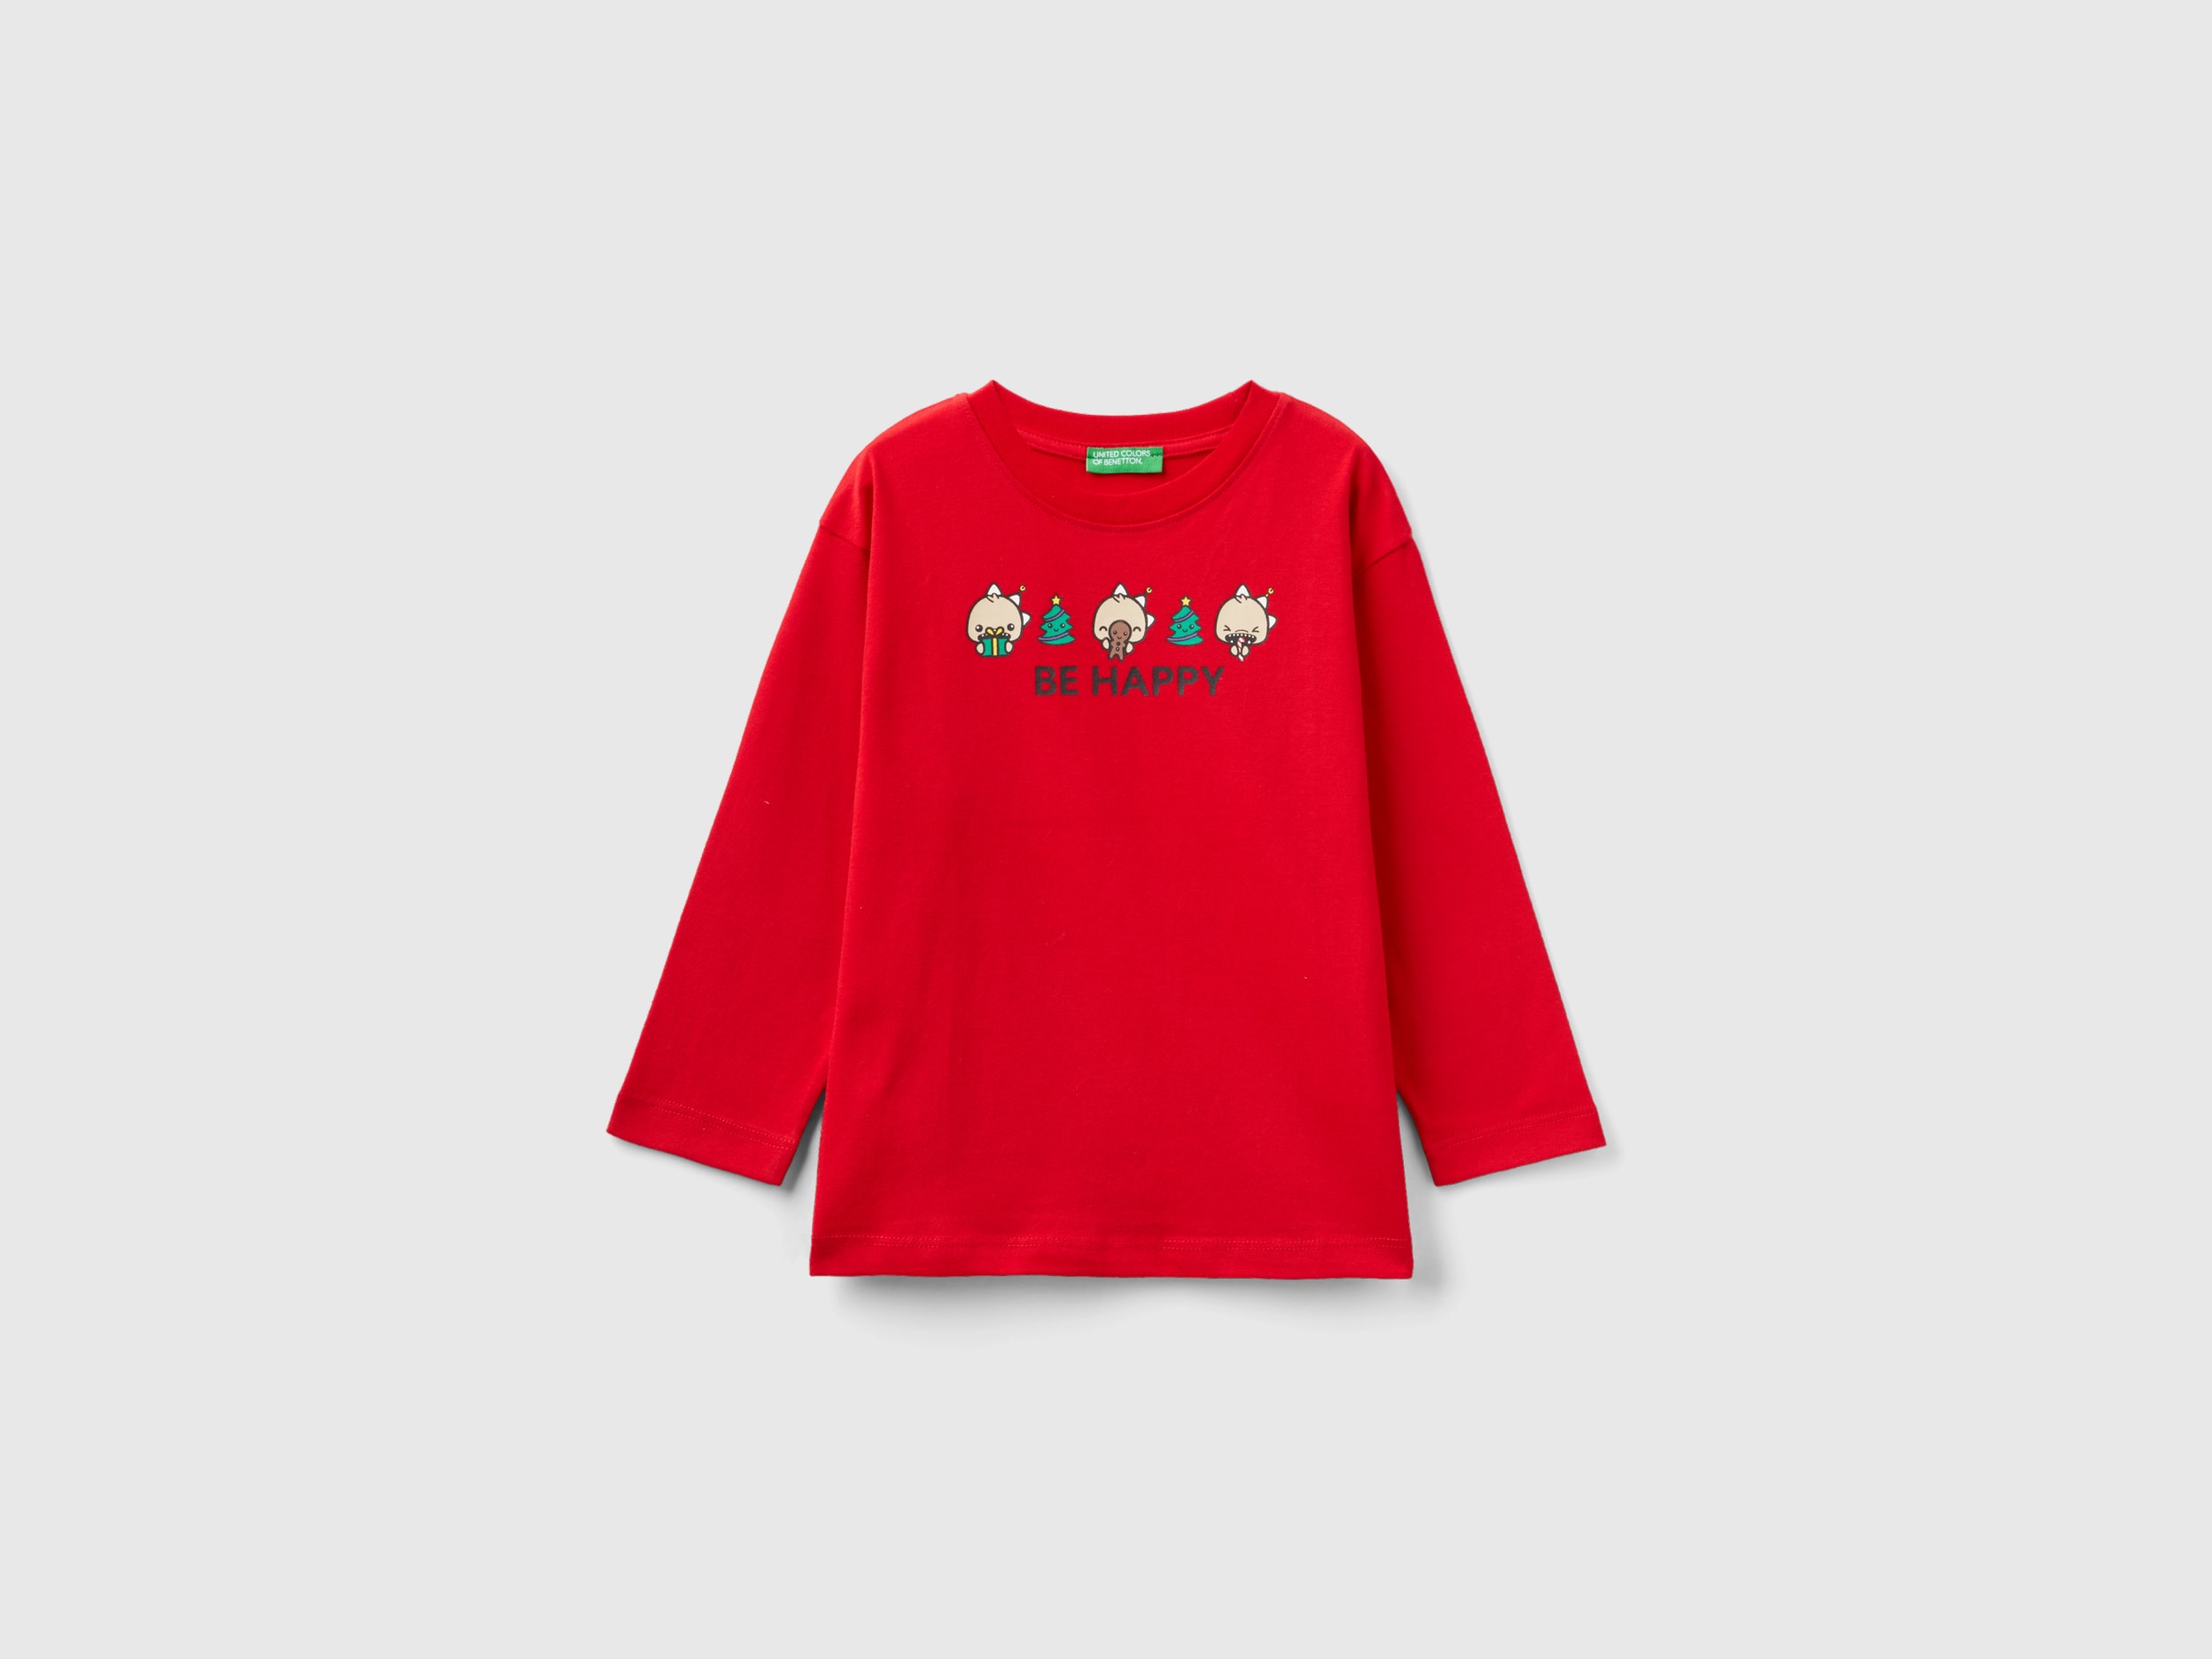 Benetton, Warm T-shirt With Christmas Print, size 5-6, Red, Kids